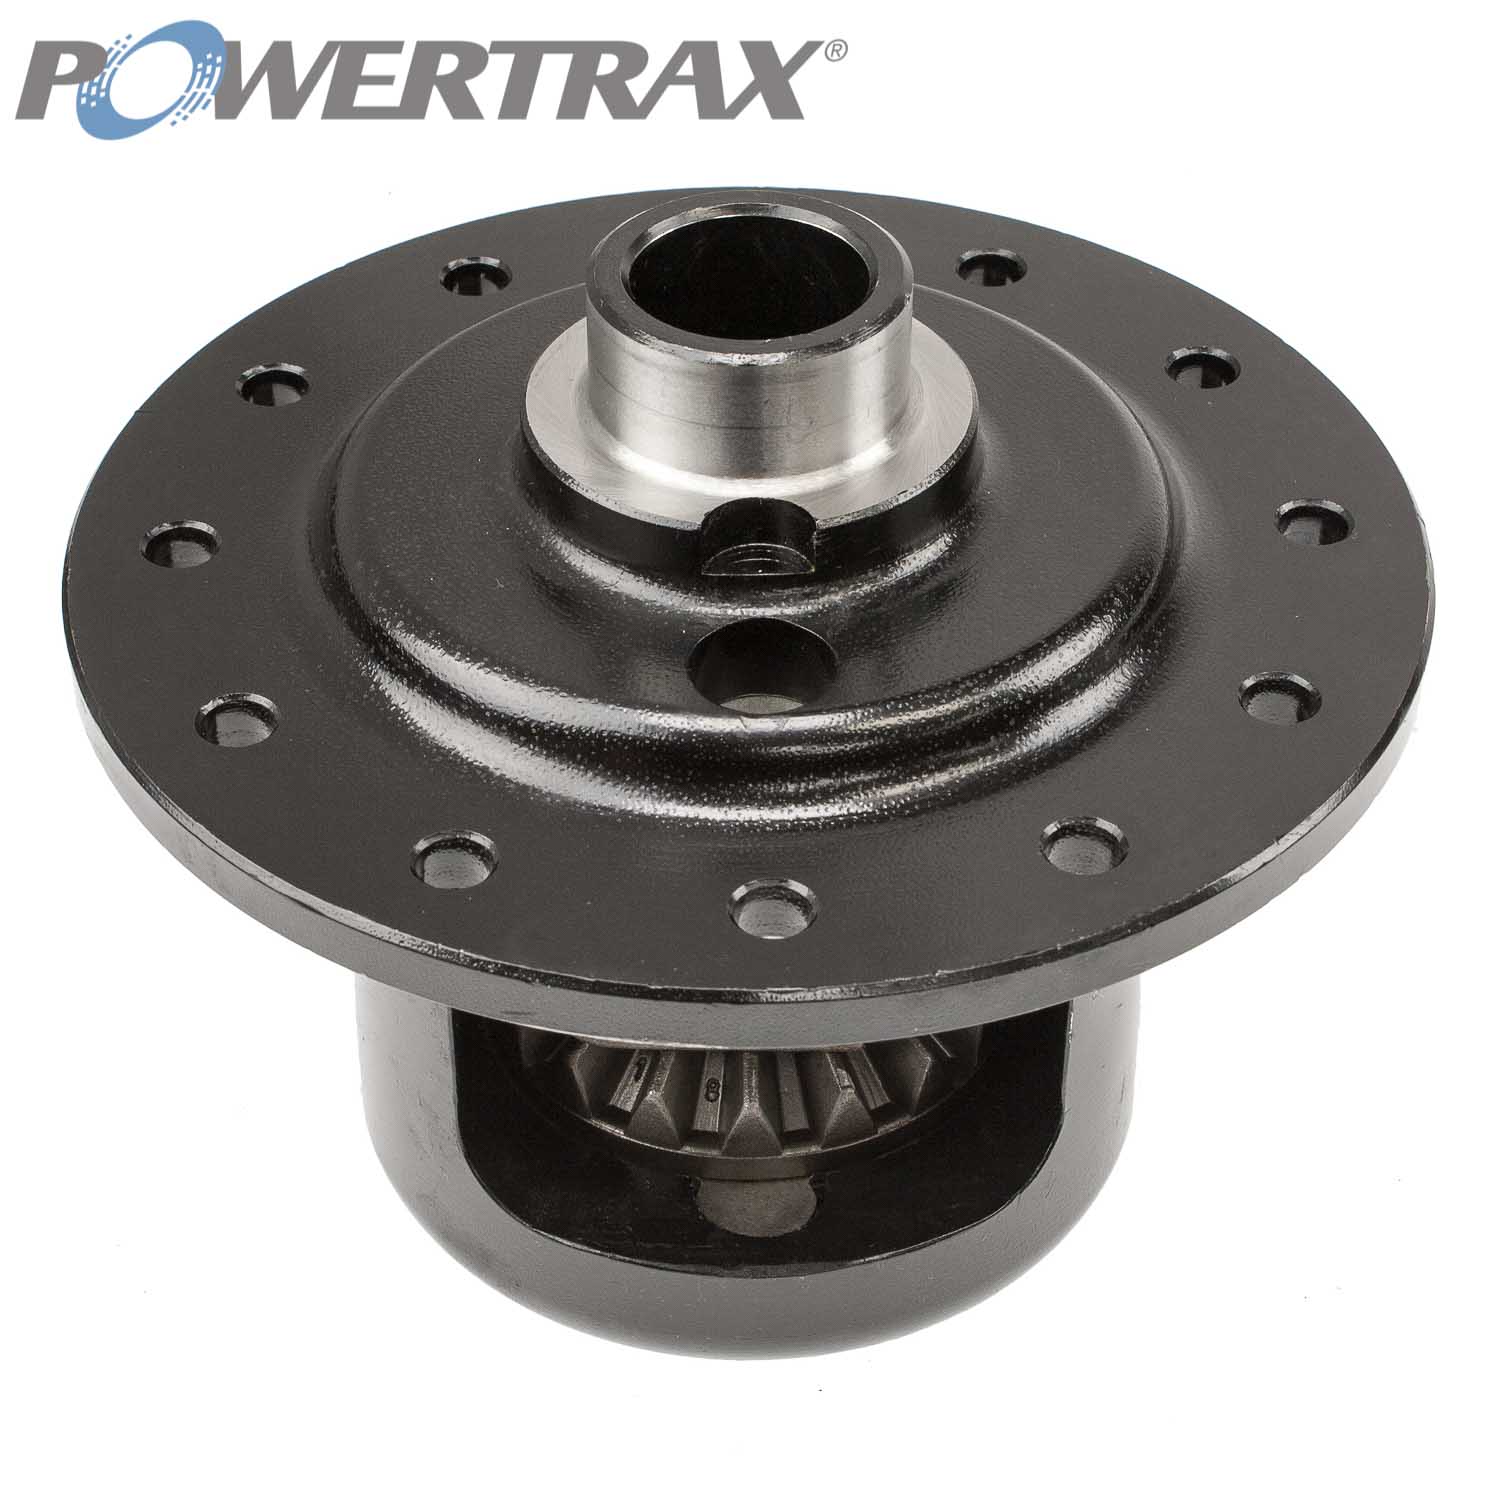 Picture of Powertrax Grip LS Traction System